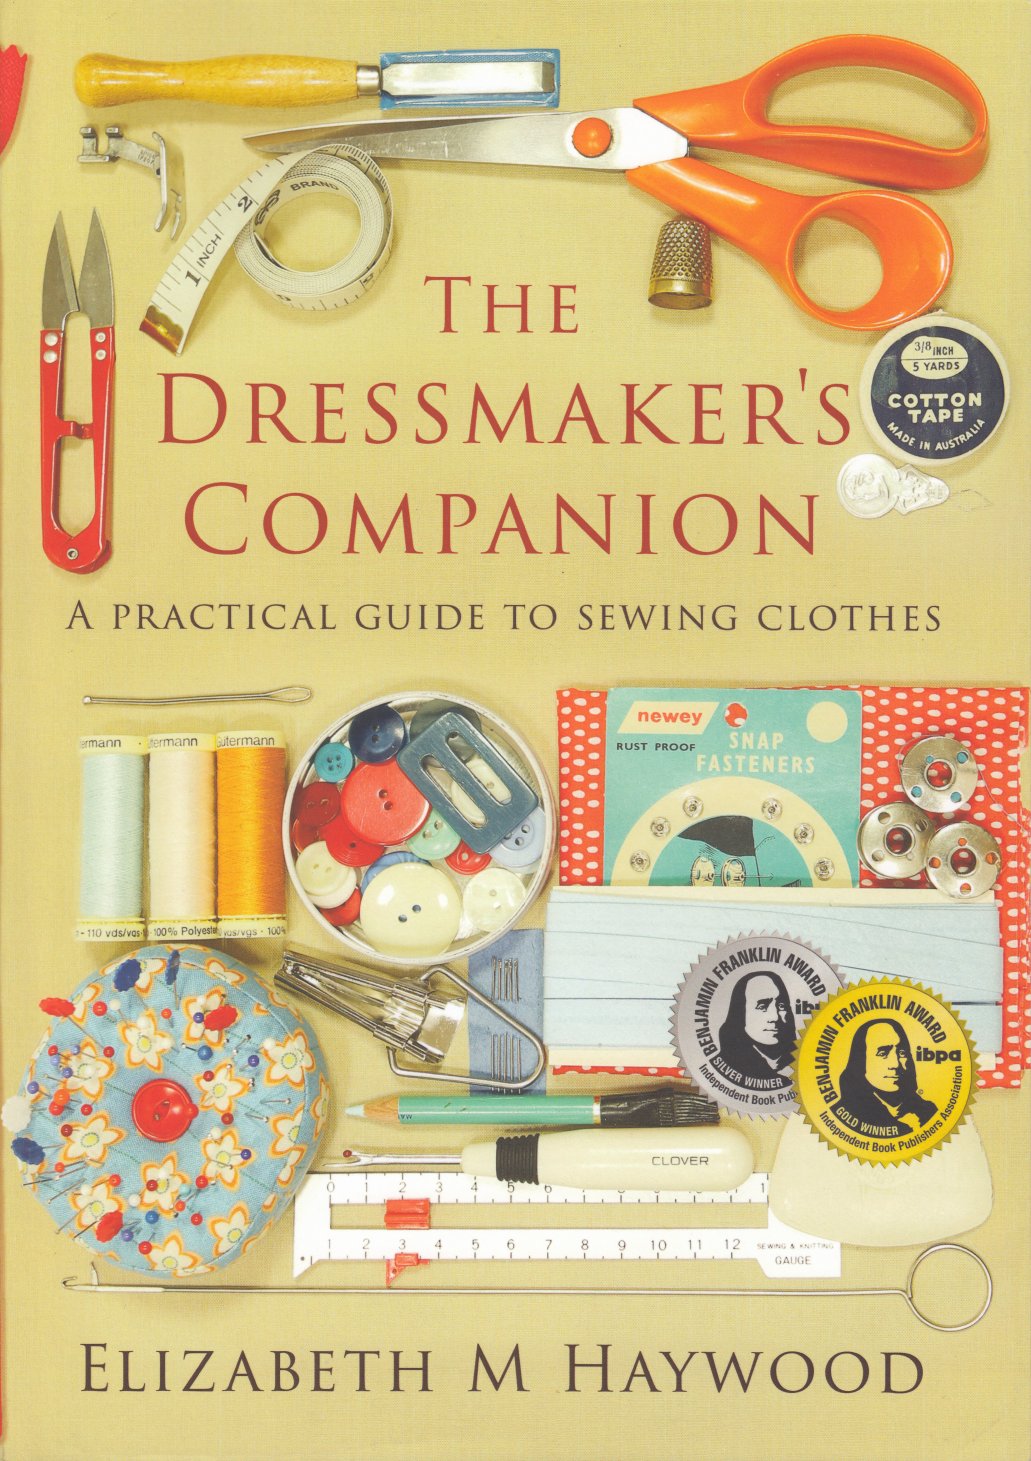 The Dressmaker's Companion A practical guide to sewing clothes  by Elizabeth Haywood